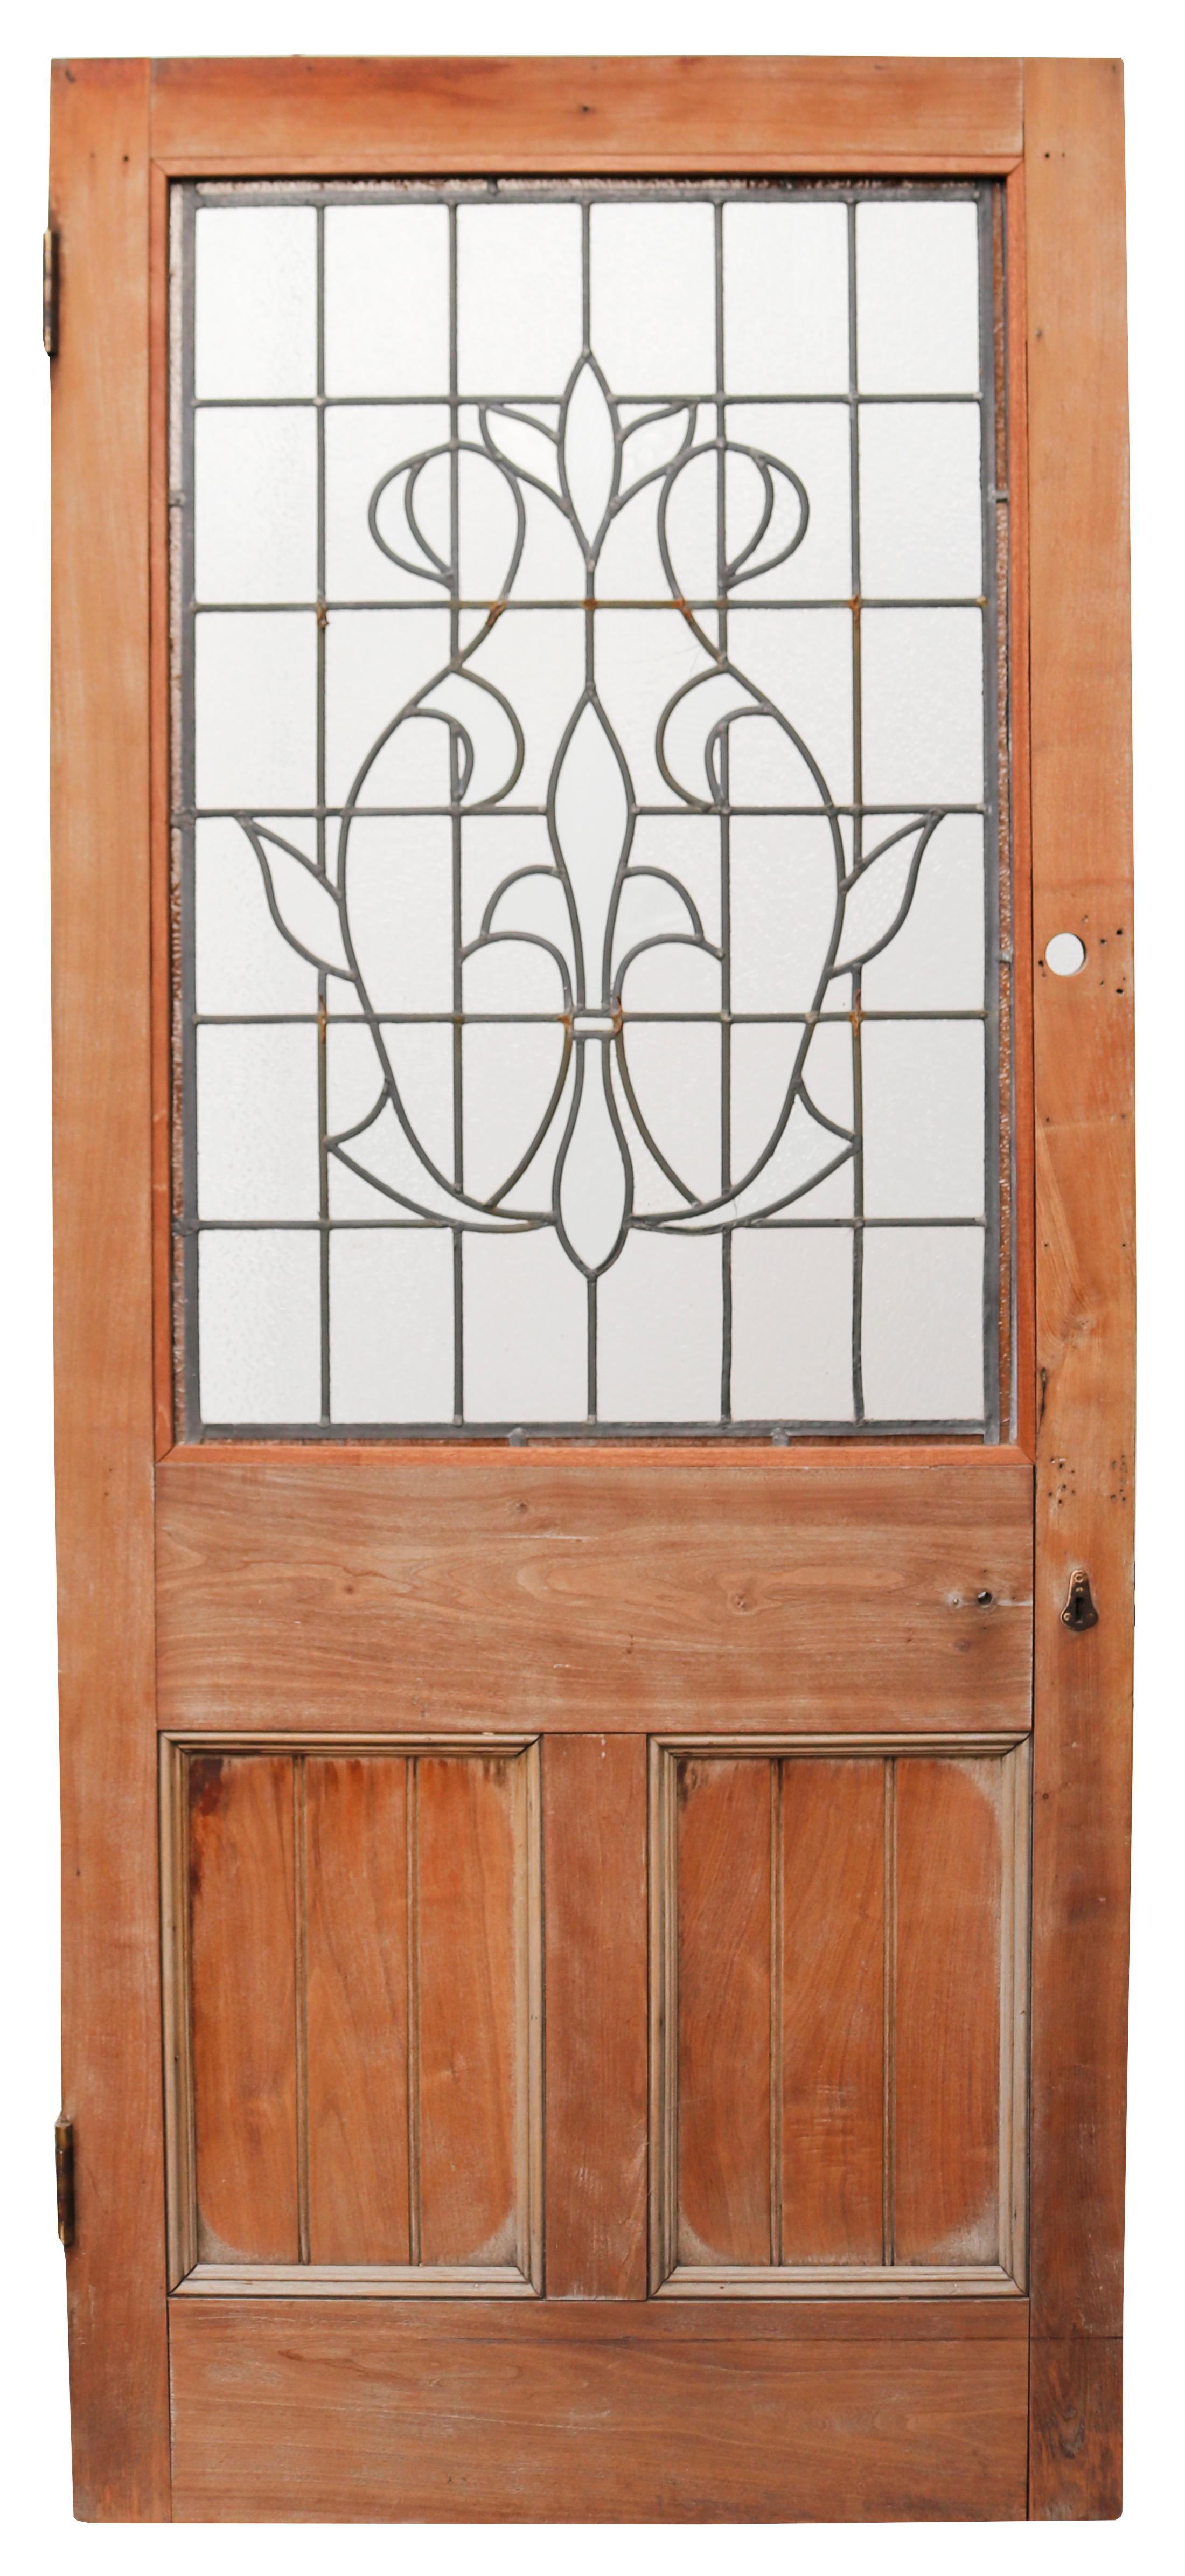 An antique mahogany door with a leaded glass panel. One side has a sanded finish, the other has previously been varnished and waxed.
 
The leaded and glazed glass in good condition overall with two cracked panes (visible in image).
 
Suitable for